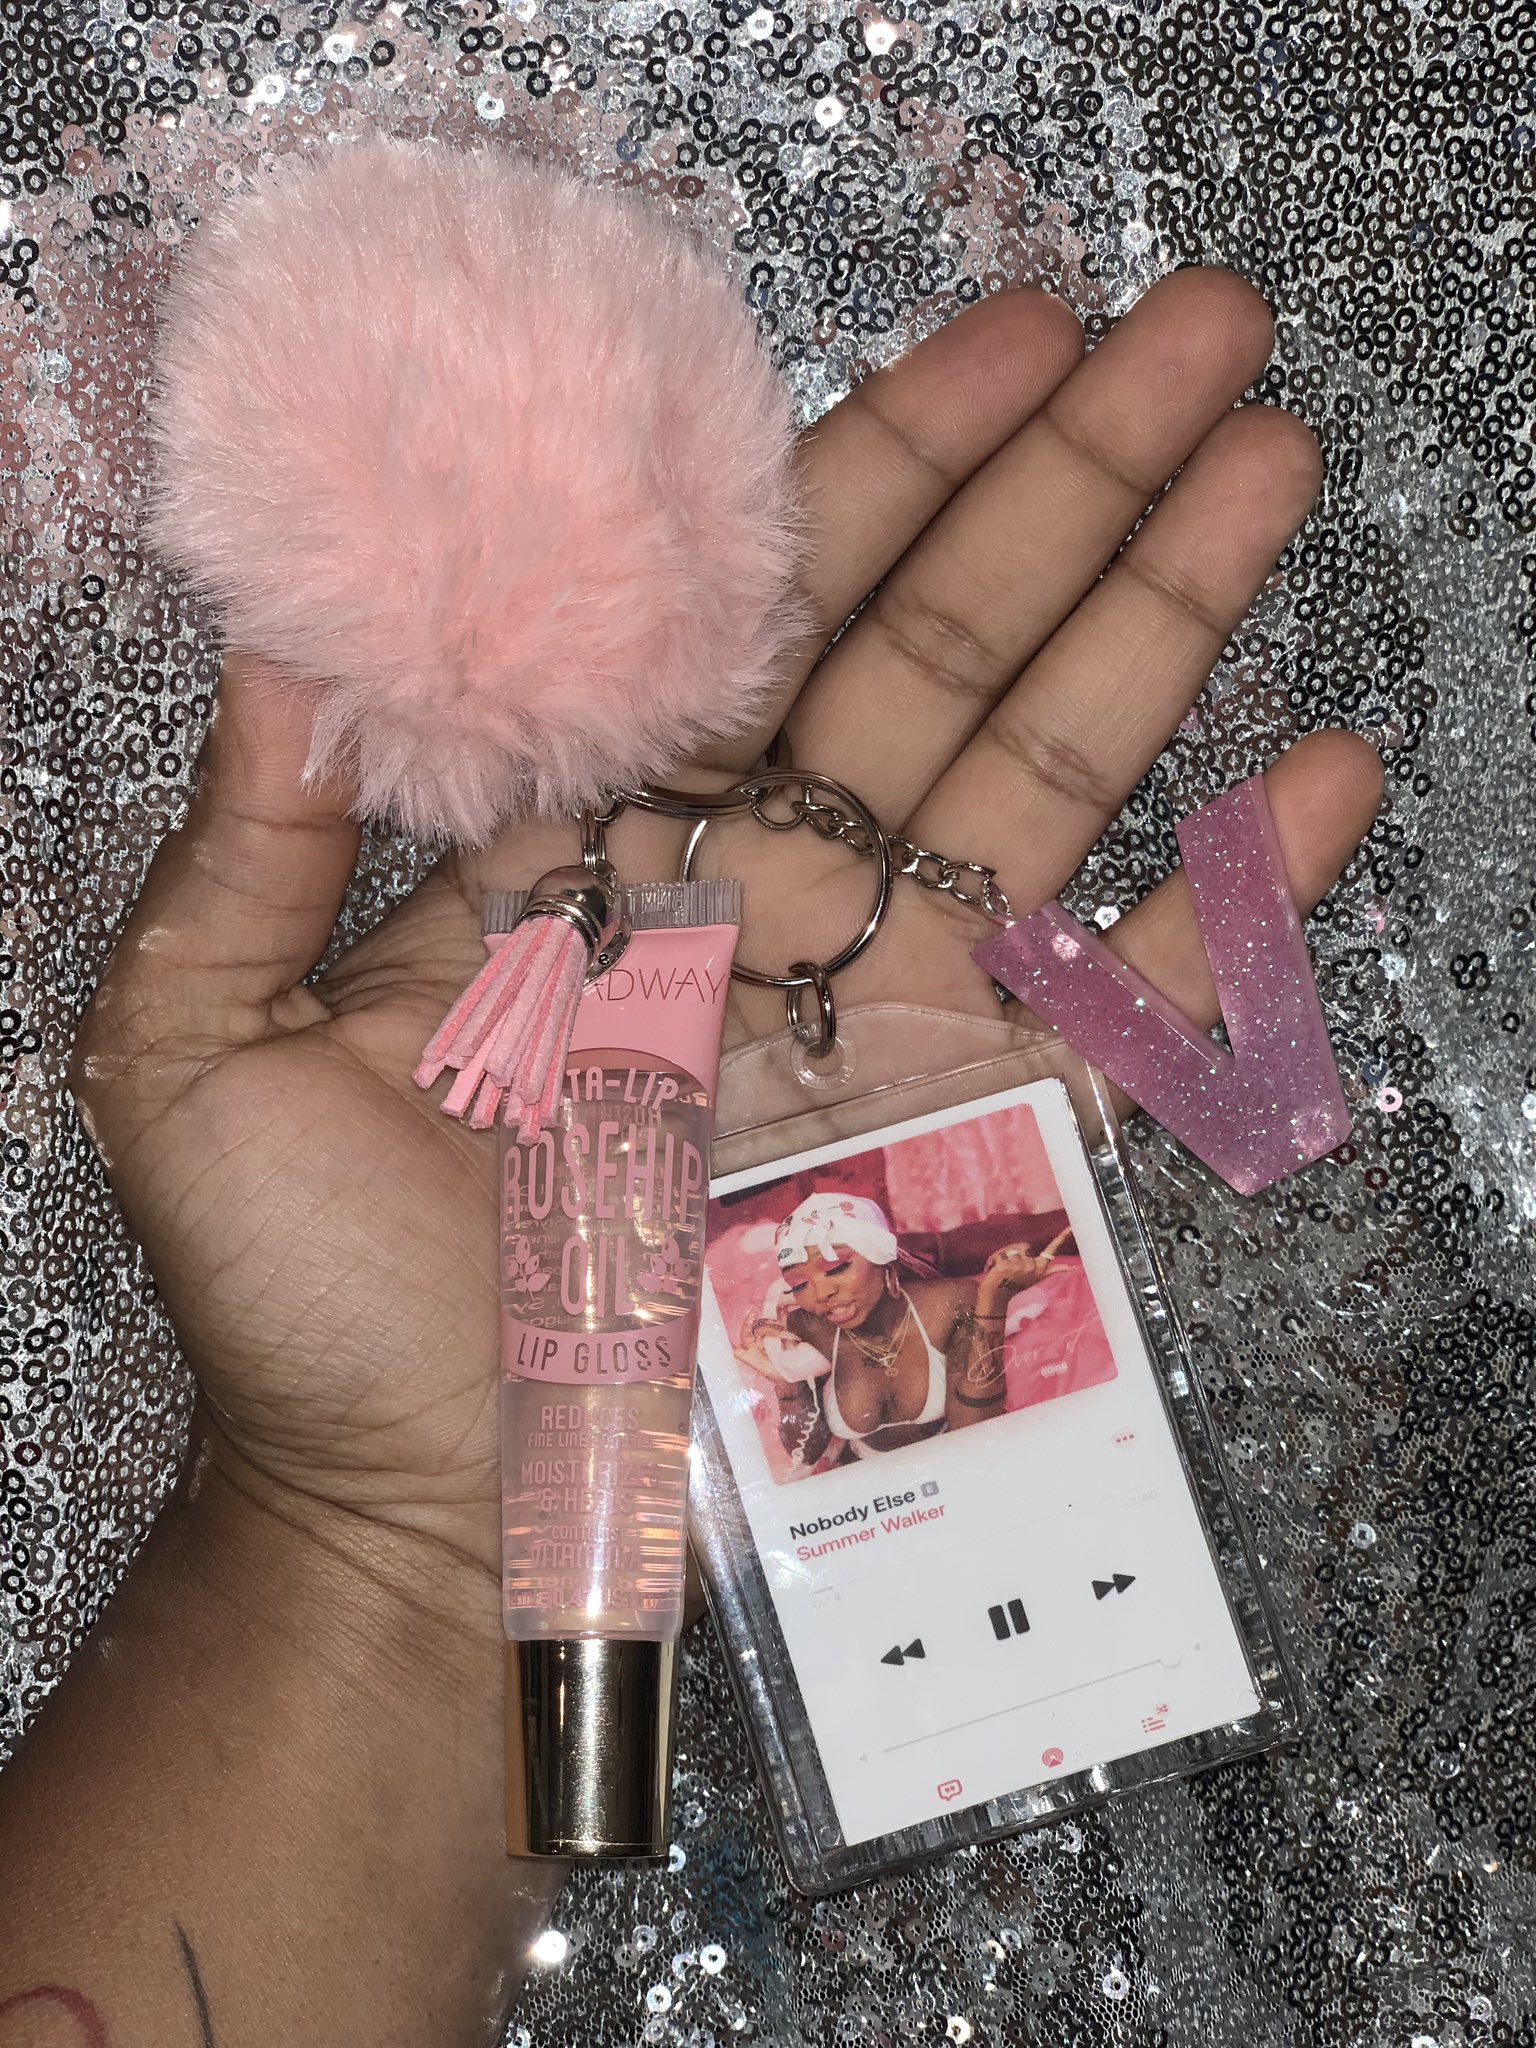 ajaayy💫 on X: Custom & Personalized KeyChains (made to order